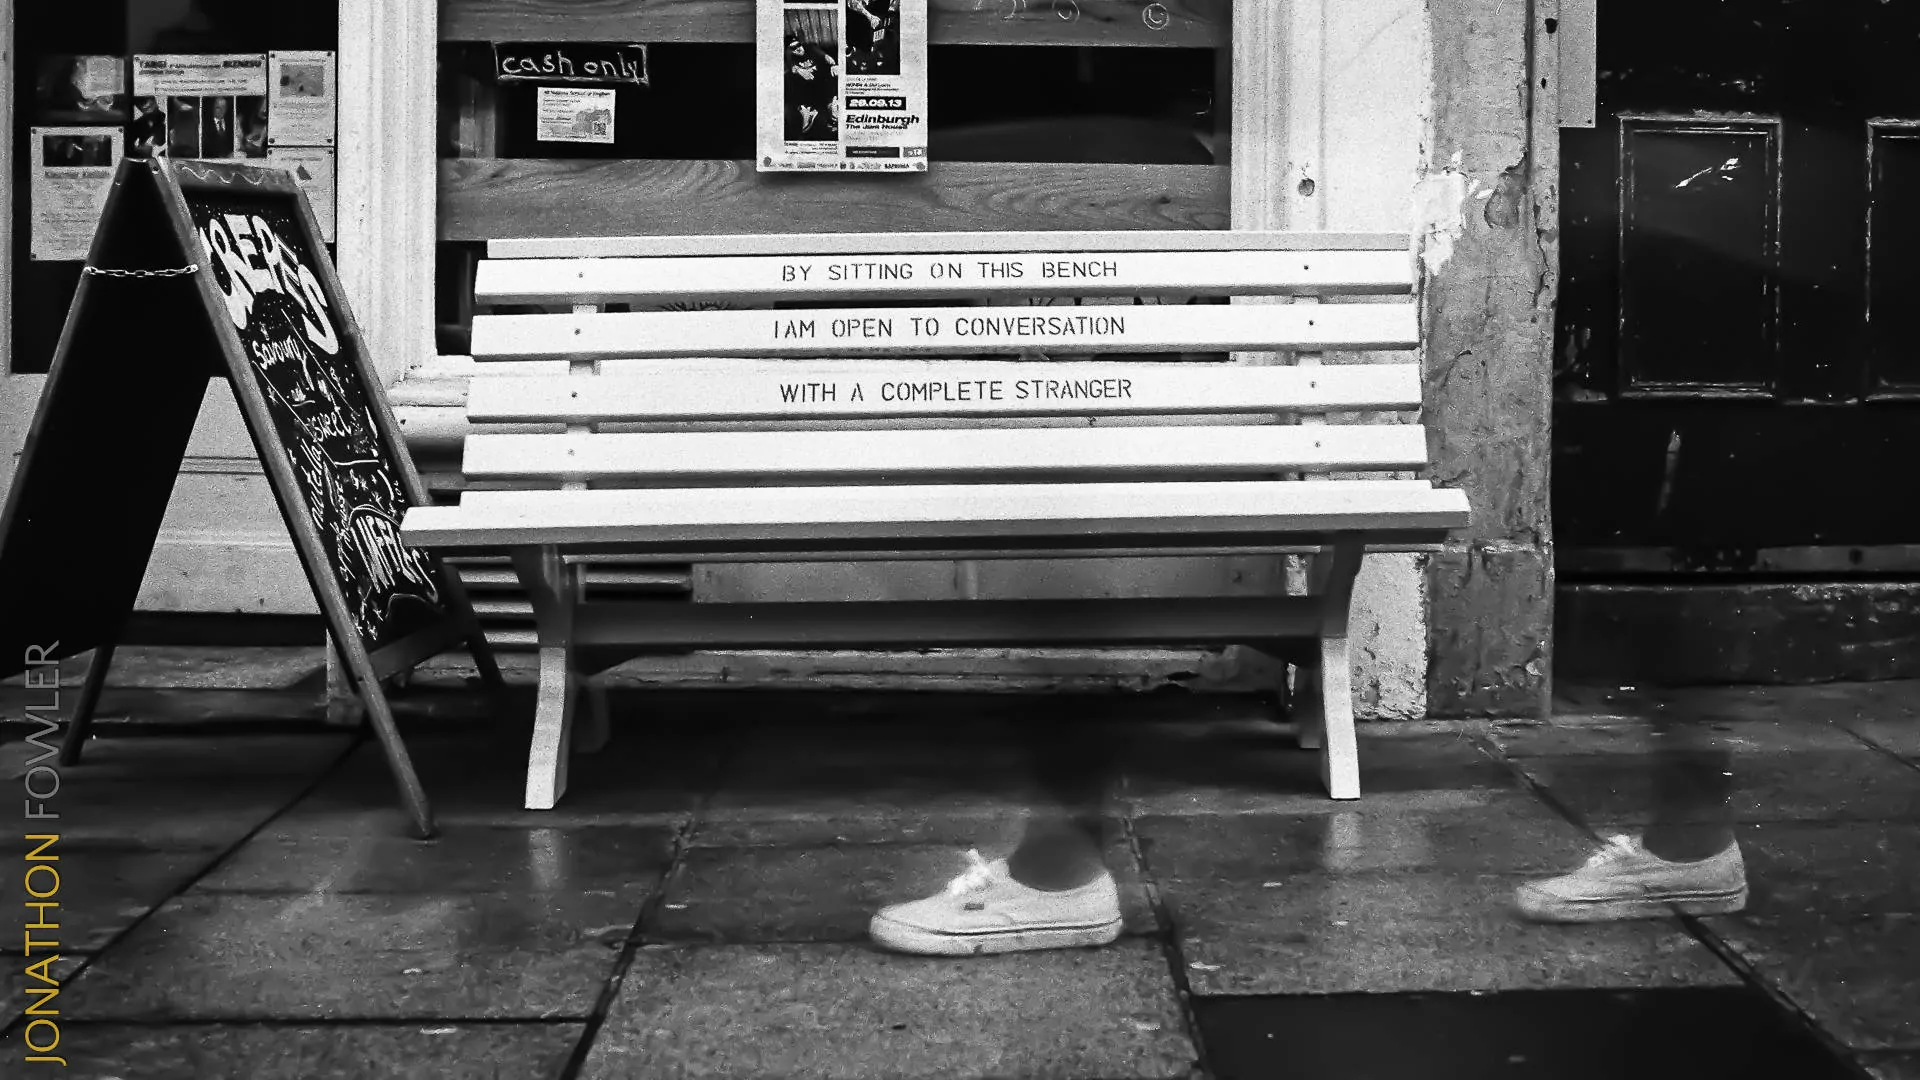 Leith Walk Ilford HP5 film black and white photo street photography - How To Choose A Photographer